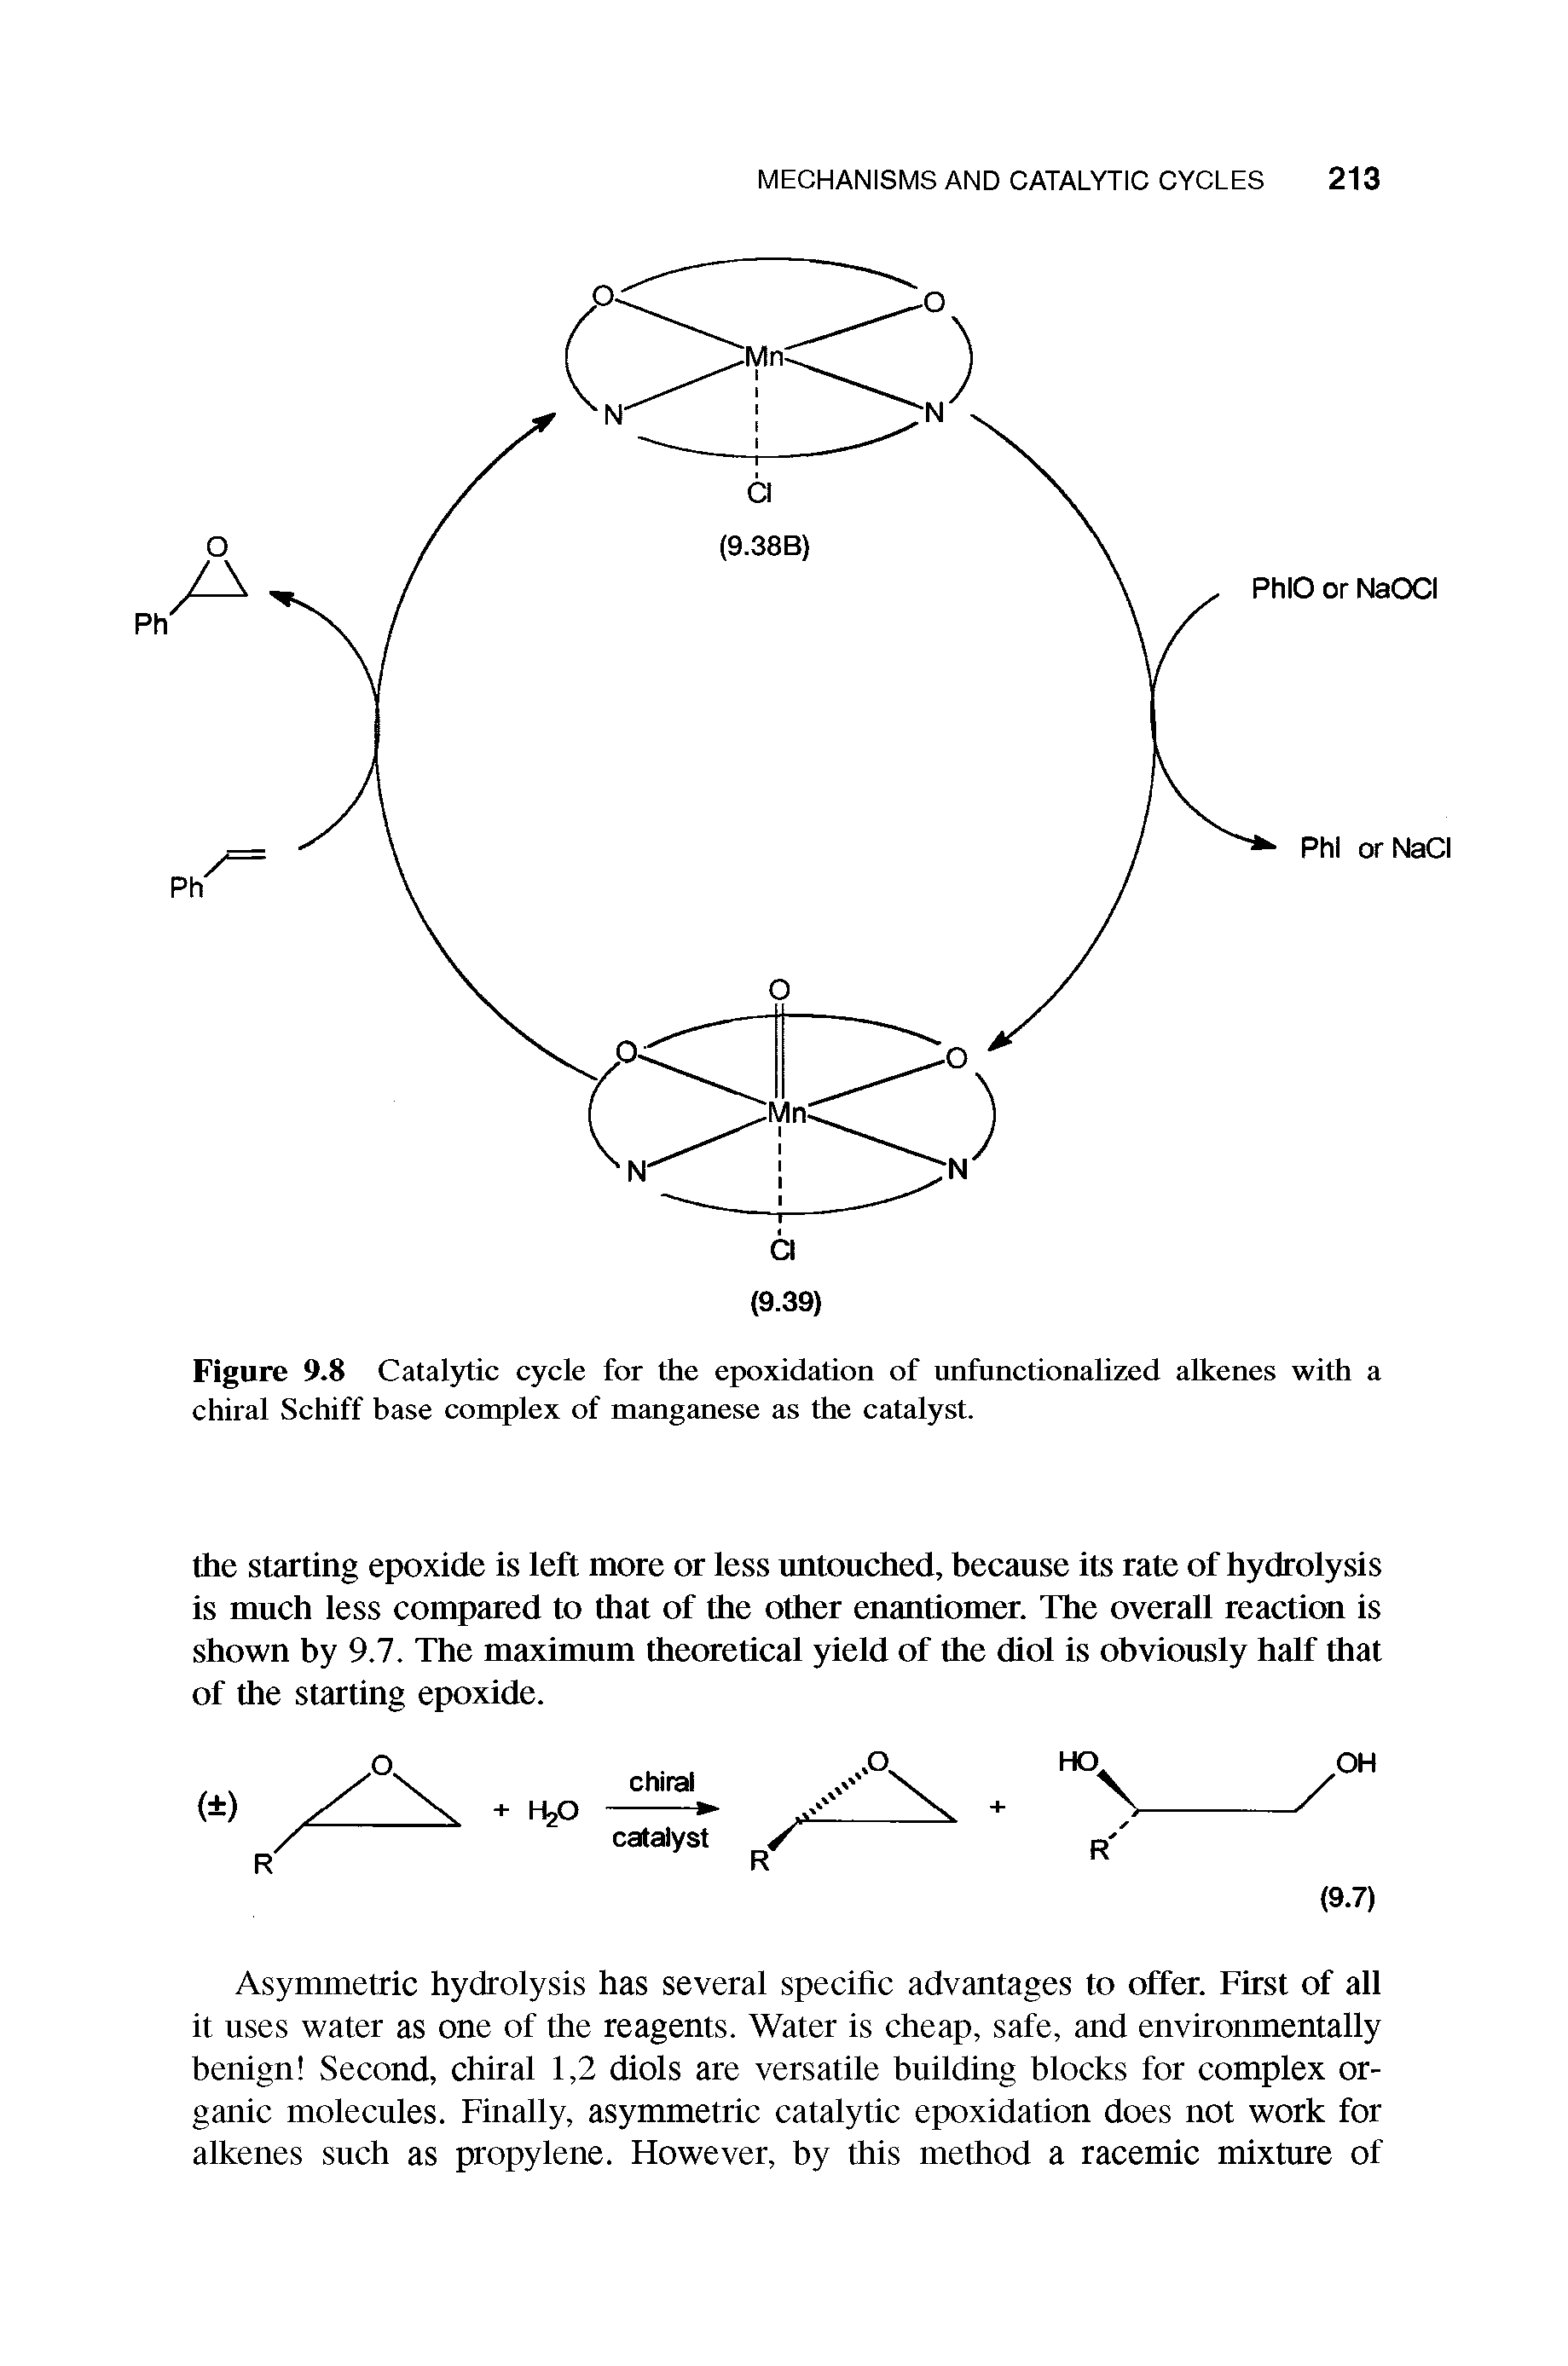 Figure 9.8 Catalytic cycle for the epoxidation of unfunctionalized alkenes with a chiral Schiff base complex of manganese as the catalyst.